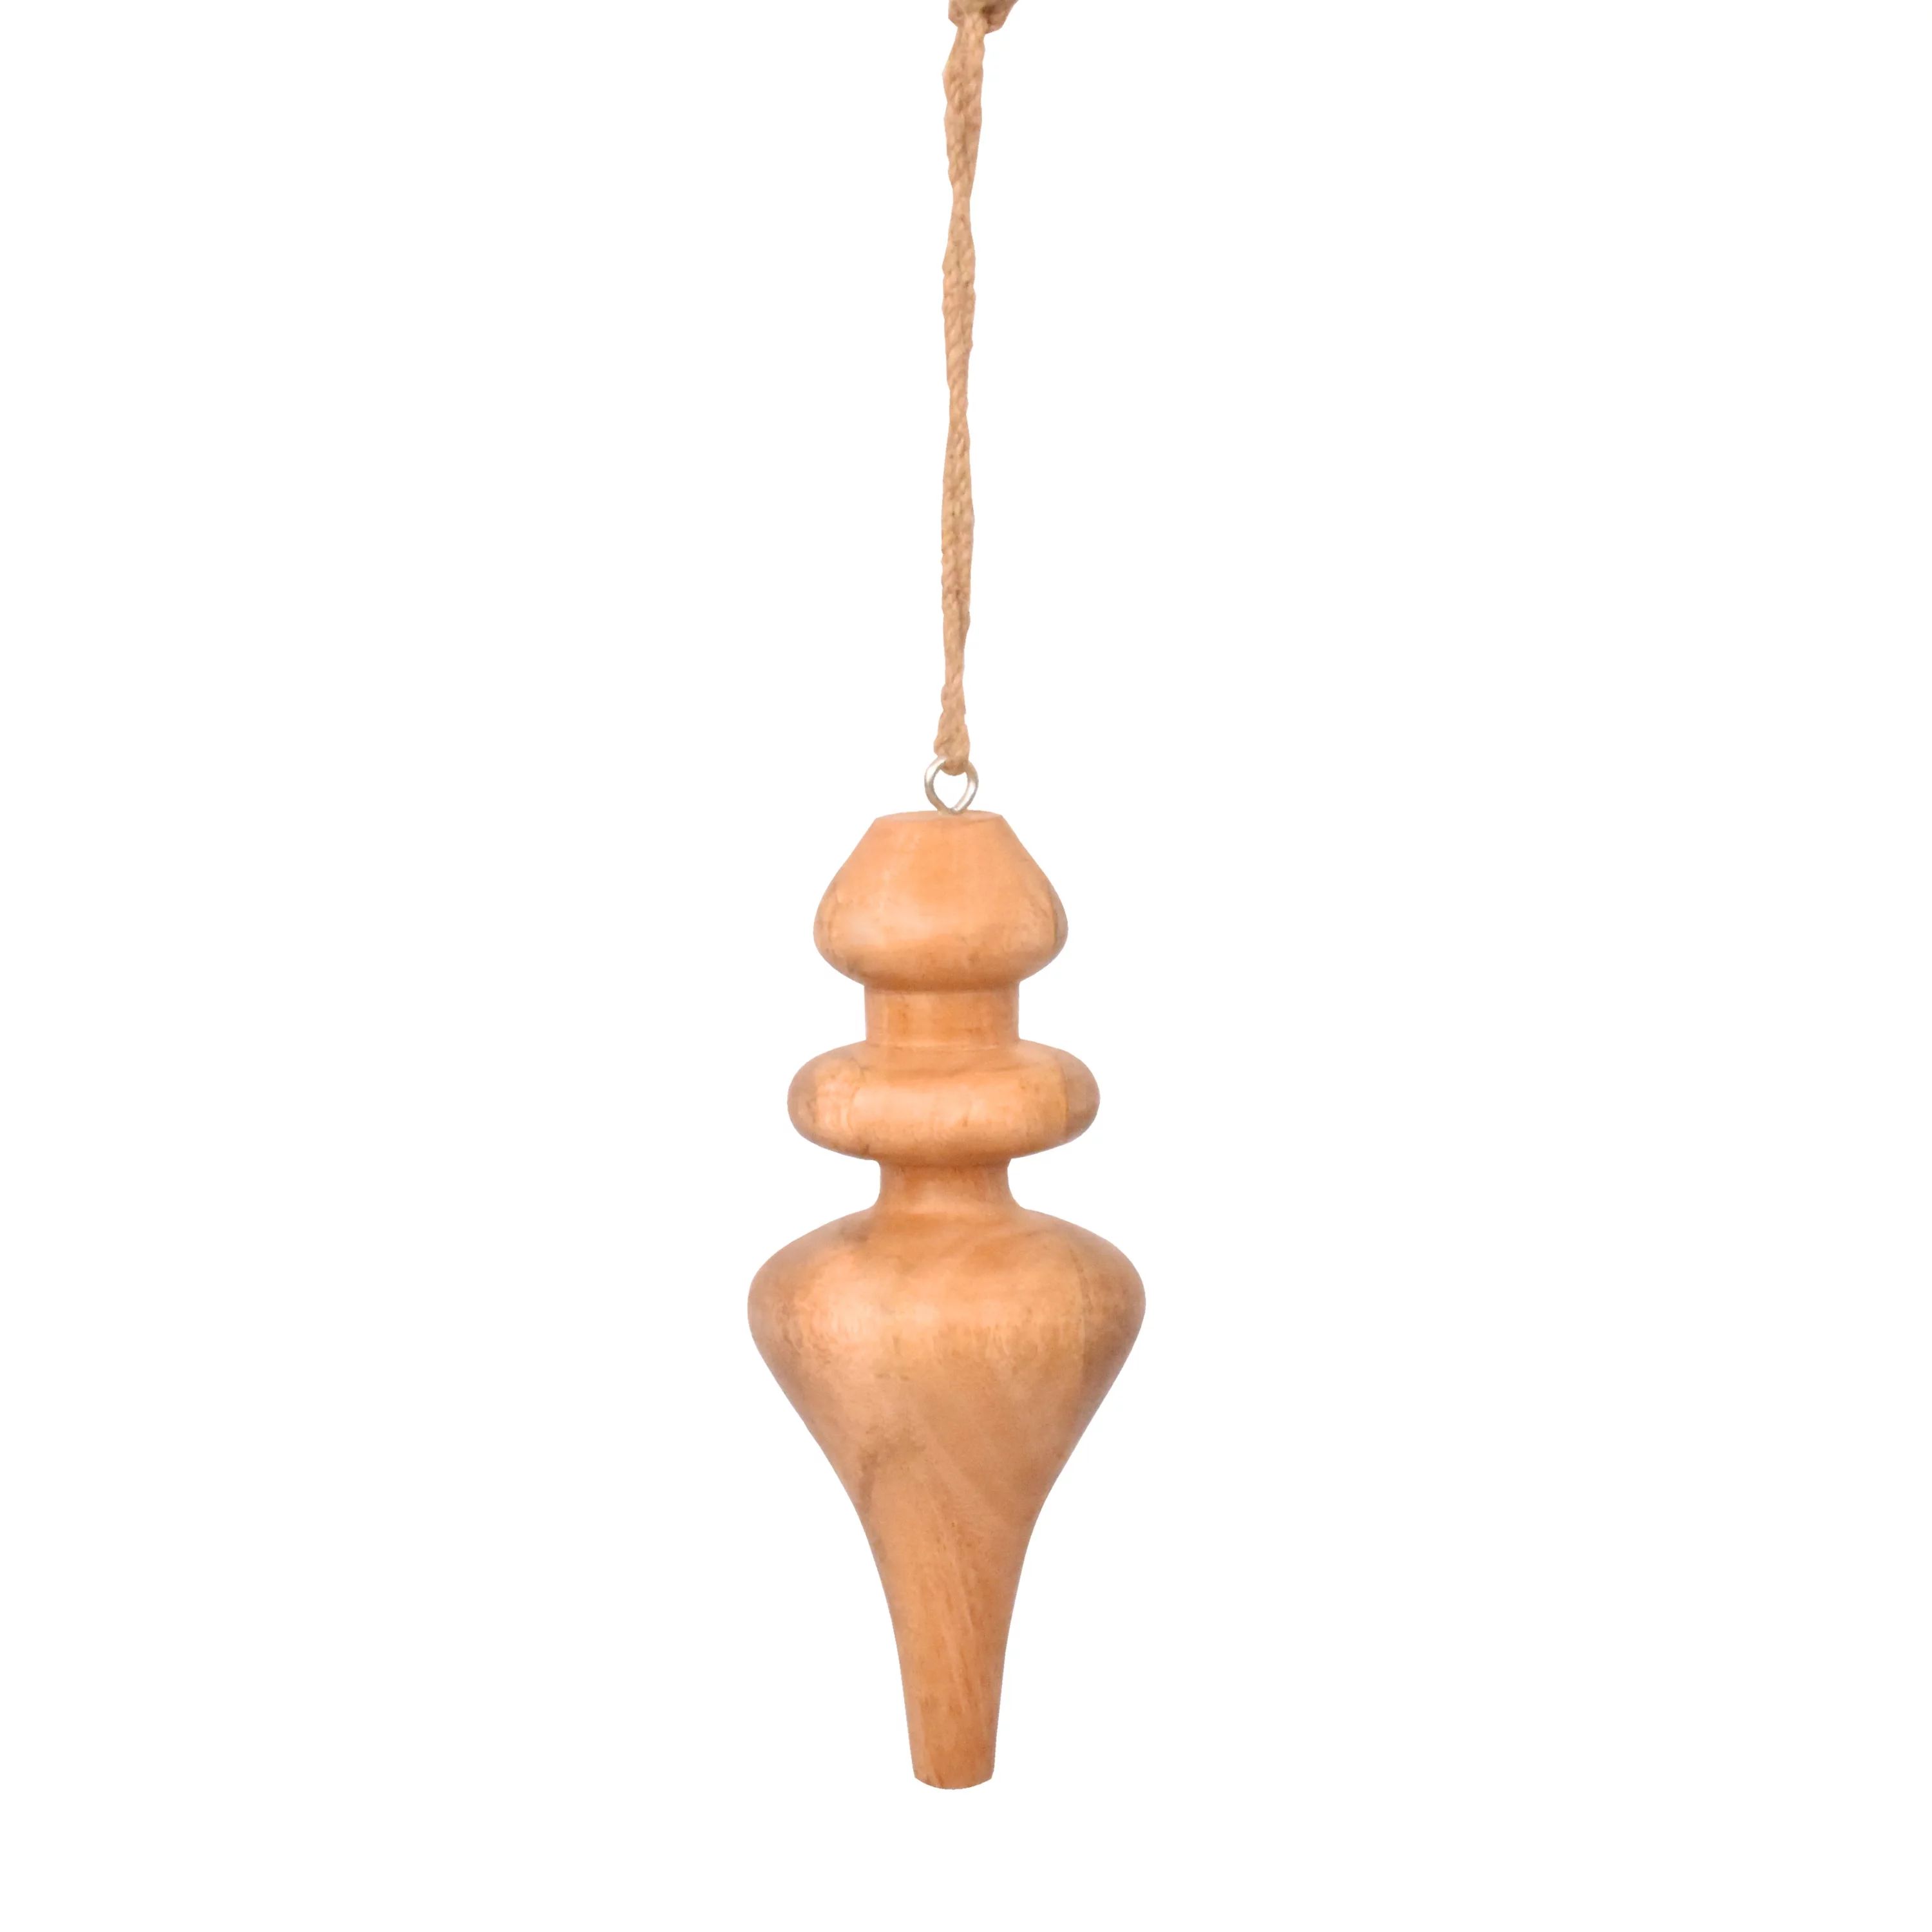 My Texas House Wood Finial Shape Christmas Hanging Jumbo Ornament with Natural Finish, 8.5 inch | Walmart (US)